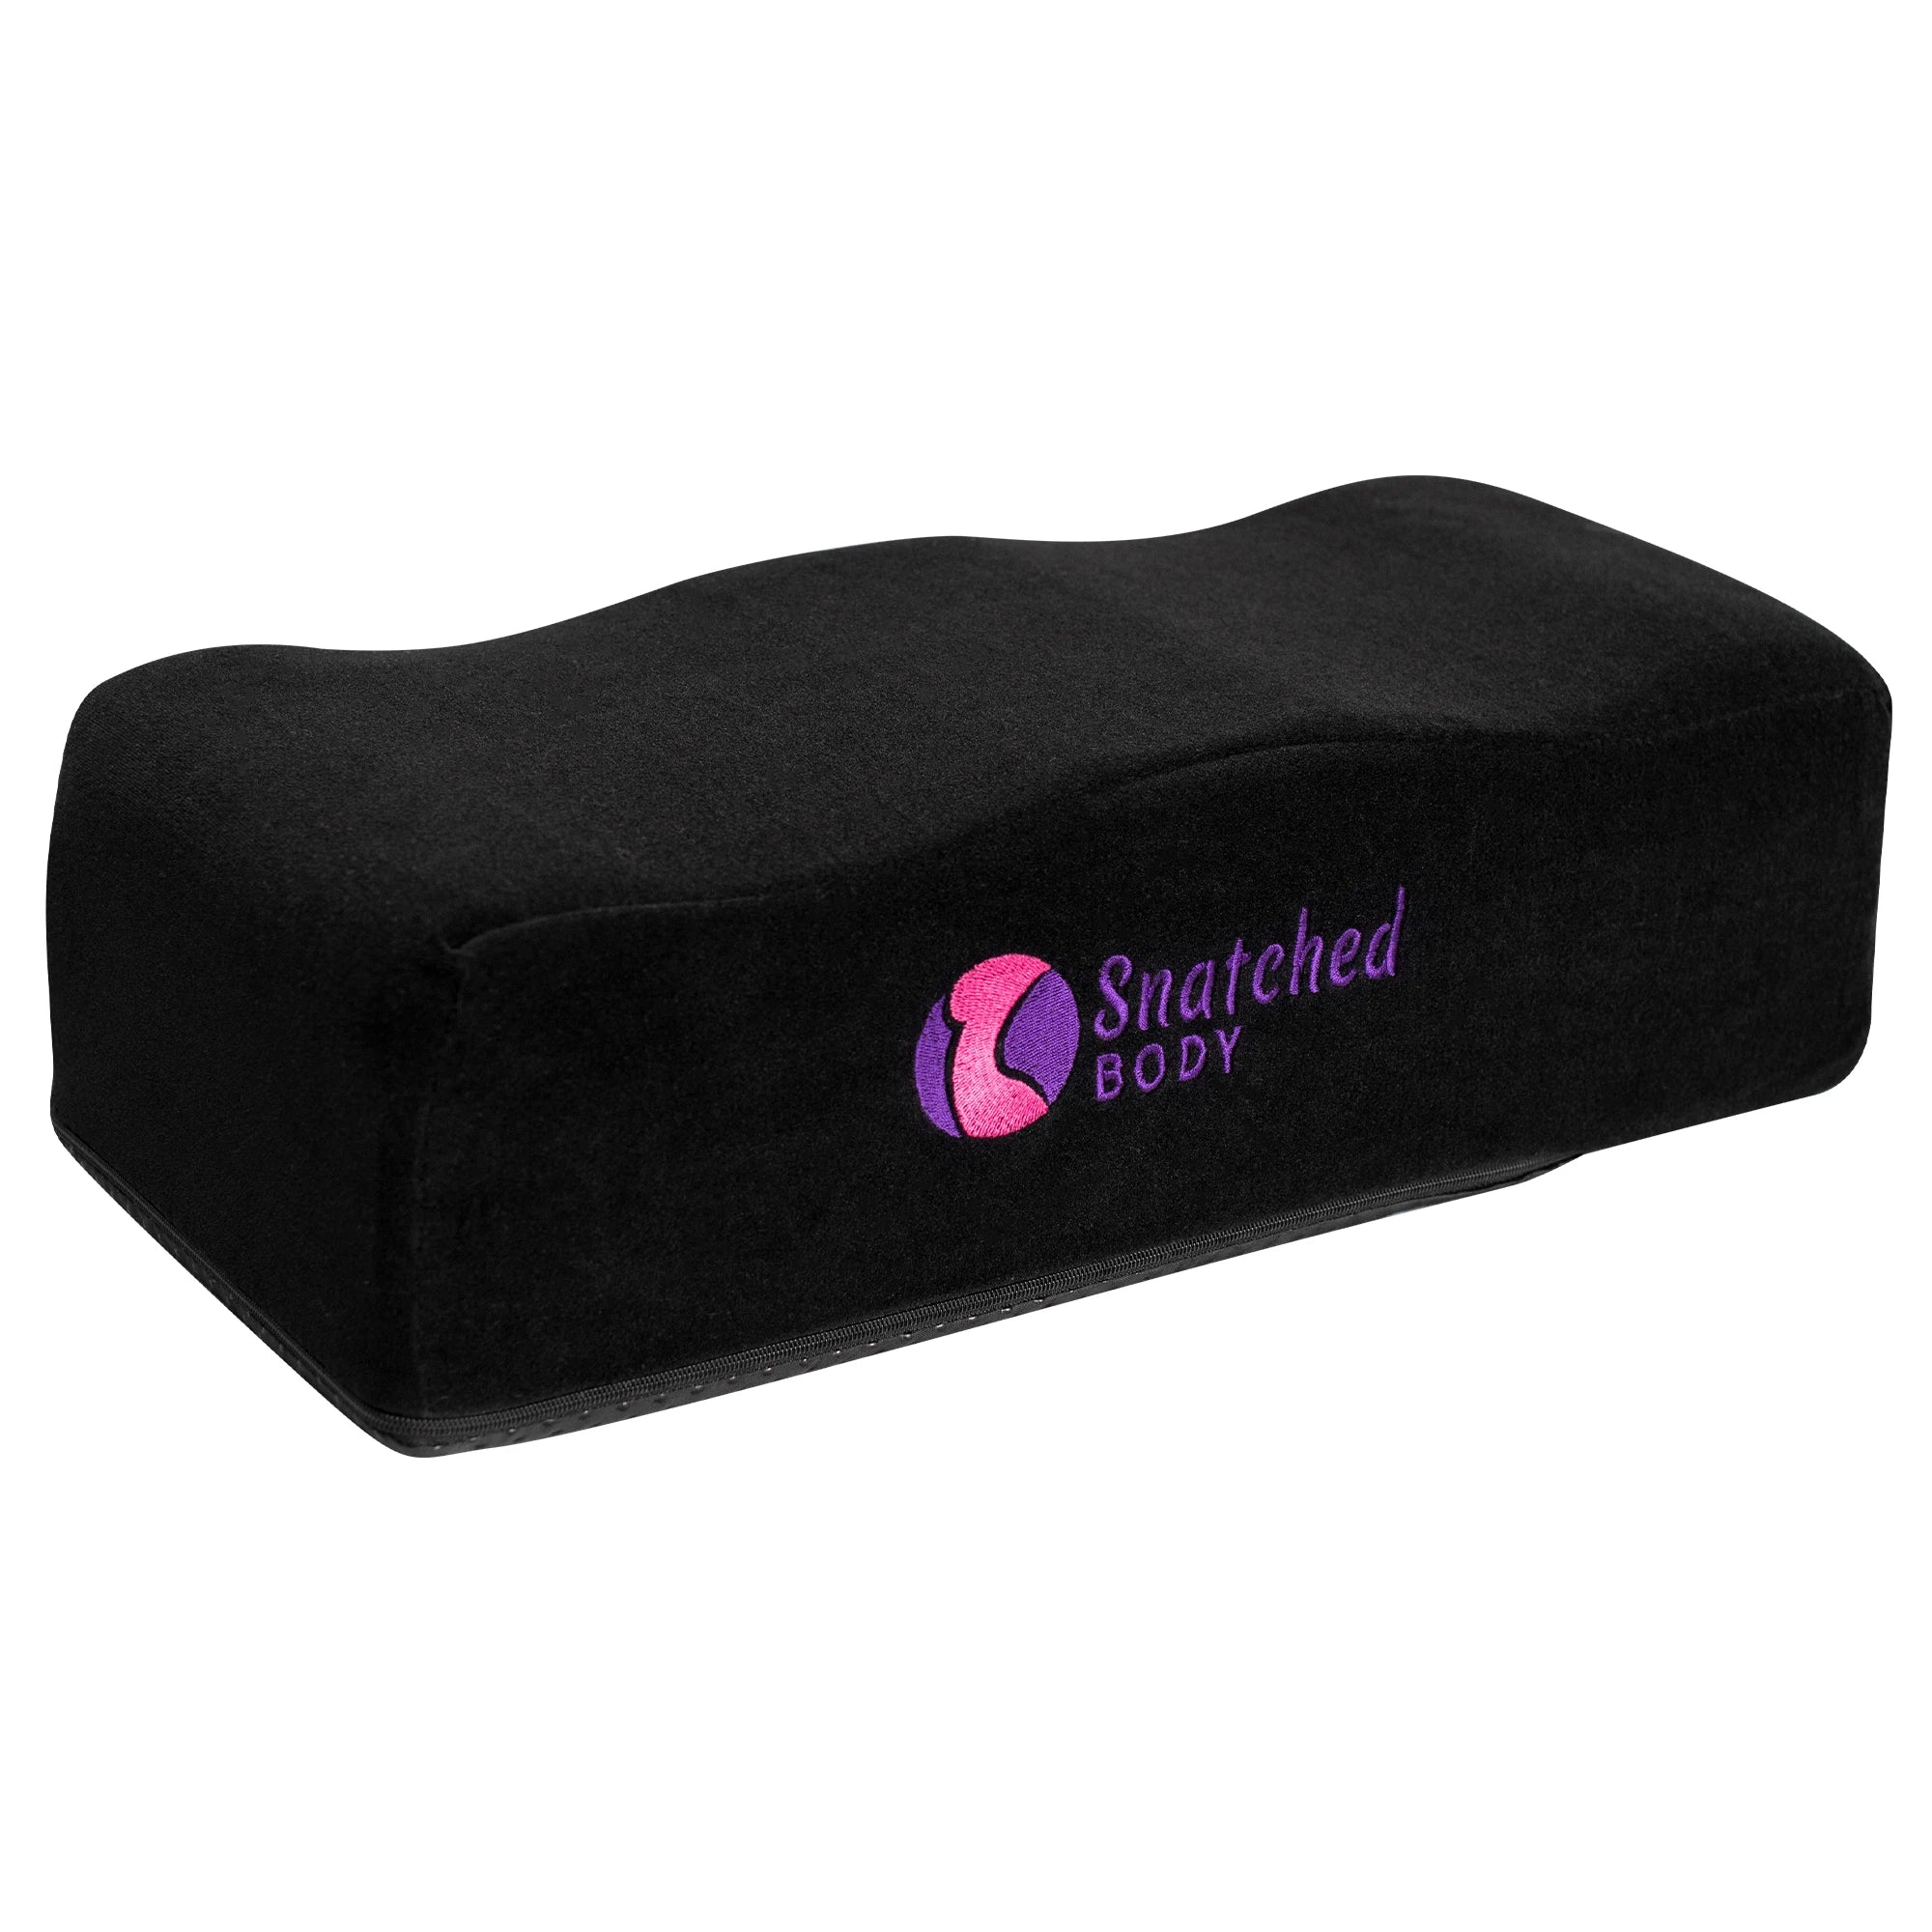 Soft BBL Pillow for Driving & Short-Term Sitting - Snatched body